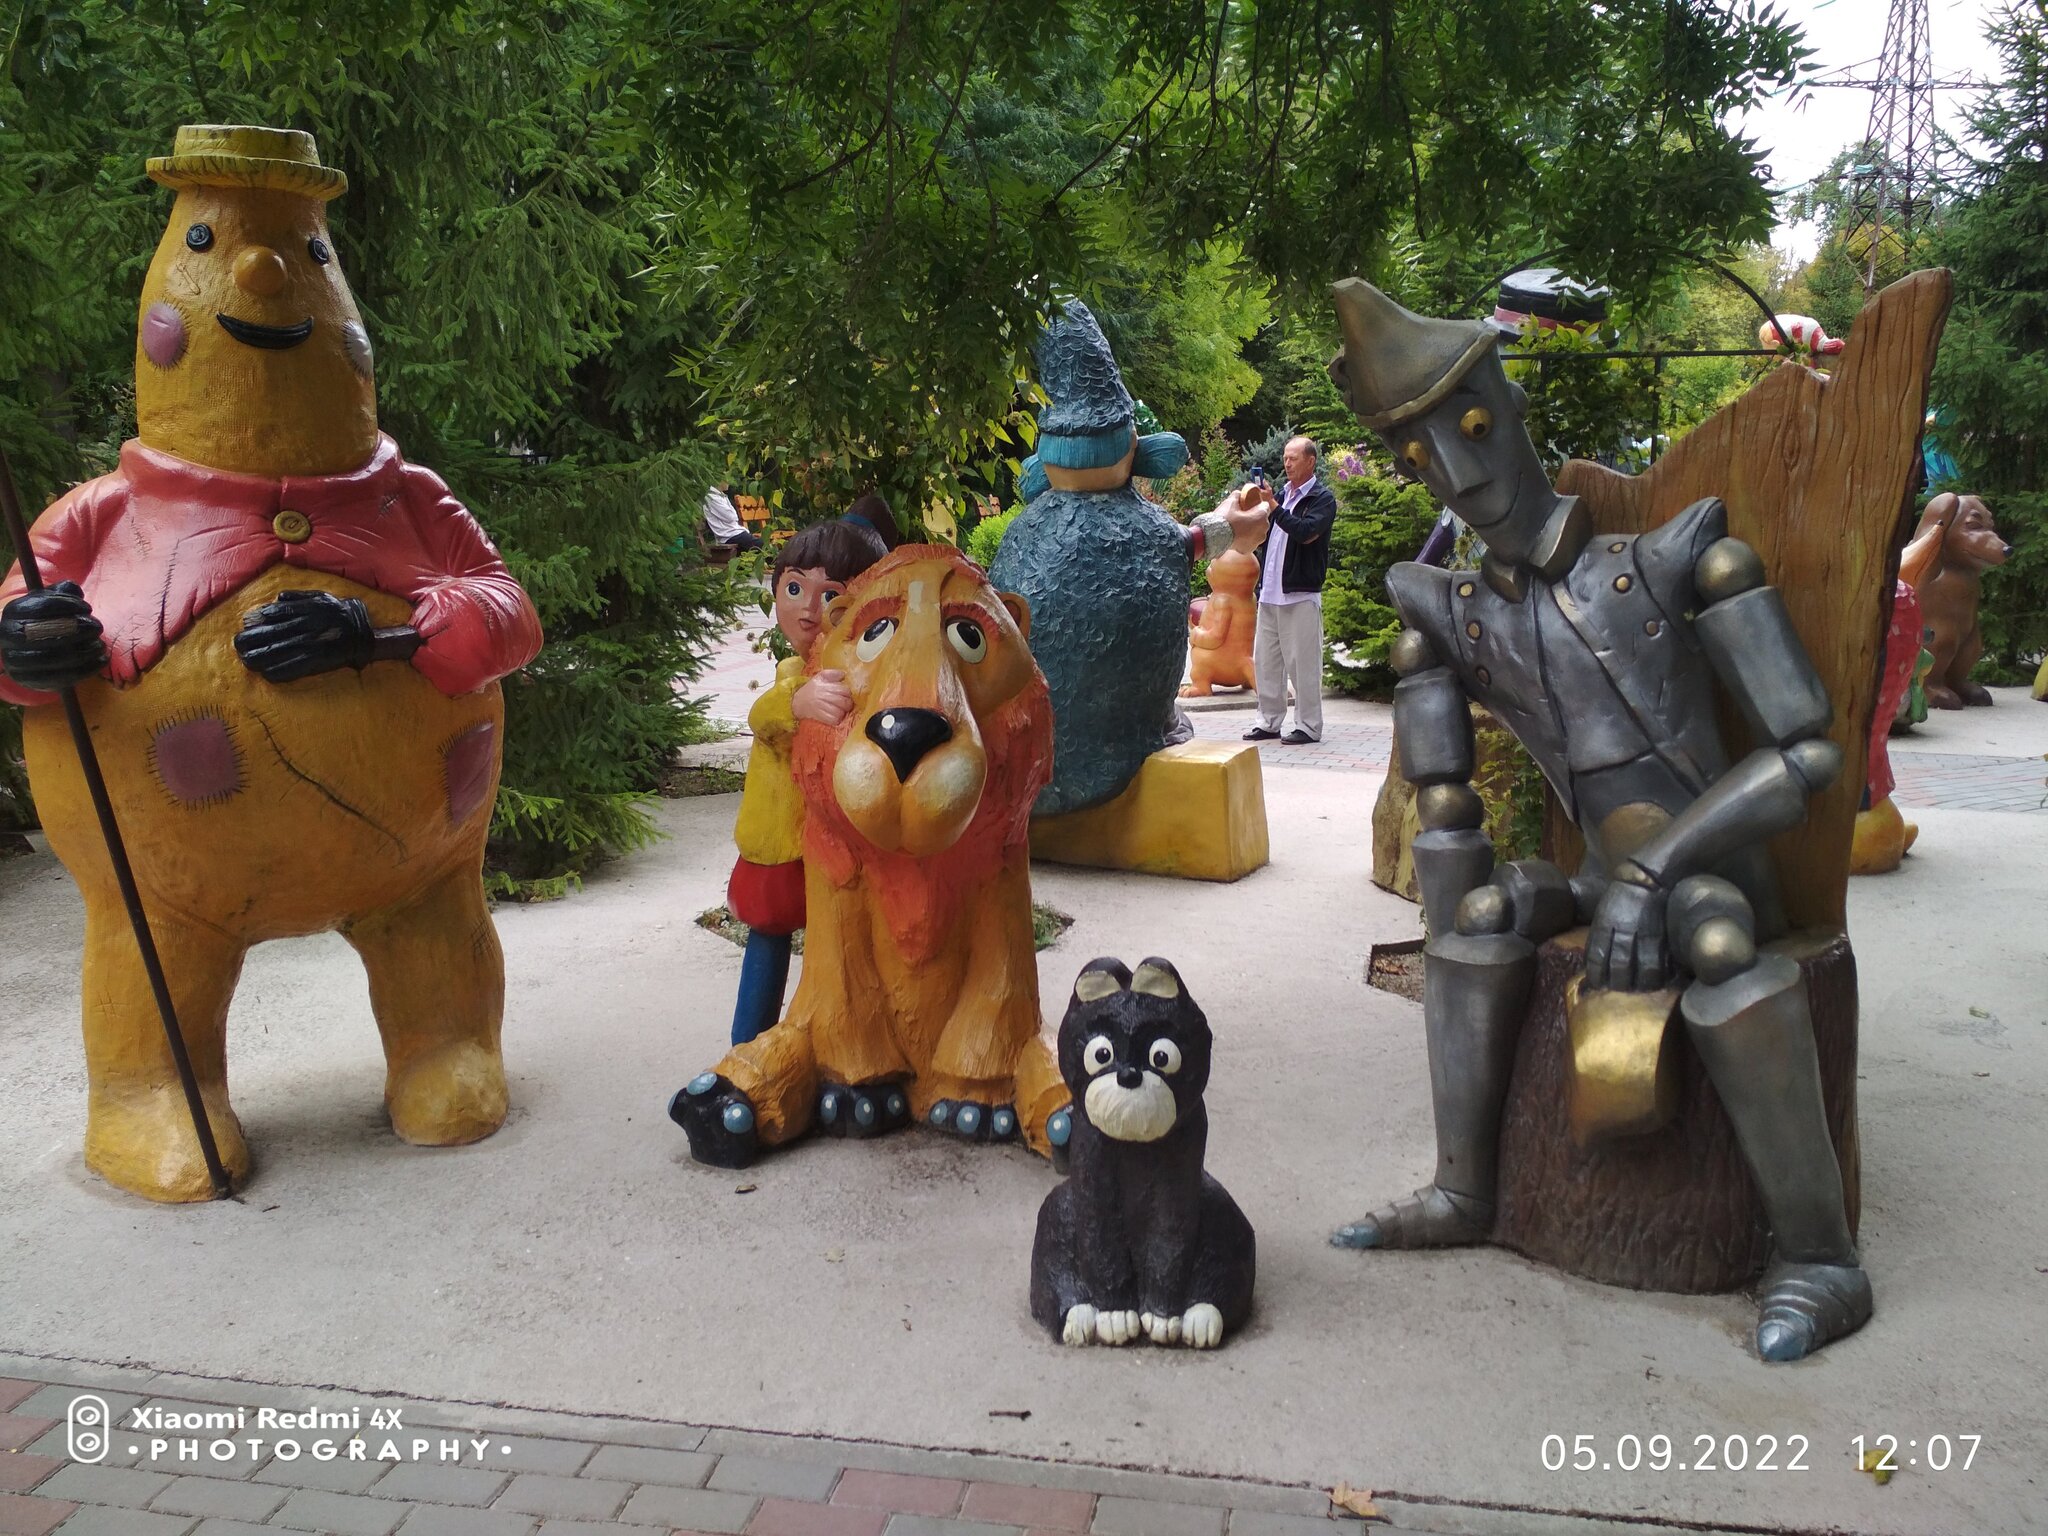 Got into a fairy tale - Travel across Russia, Sculpture, Characters (edit), Longpost, The investigation is being conducted by koloboks, Cheburashka, Leopold the Cat, Milota, The park, Cartoon characters, Soviet cartoons, Cartoons, Cyclist, Bakhchisarai, Travels, Story, Crimea, My